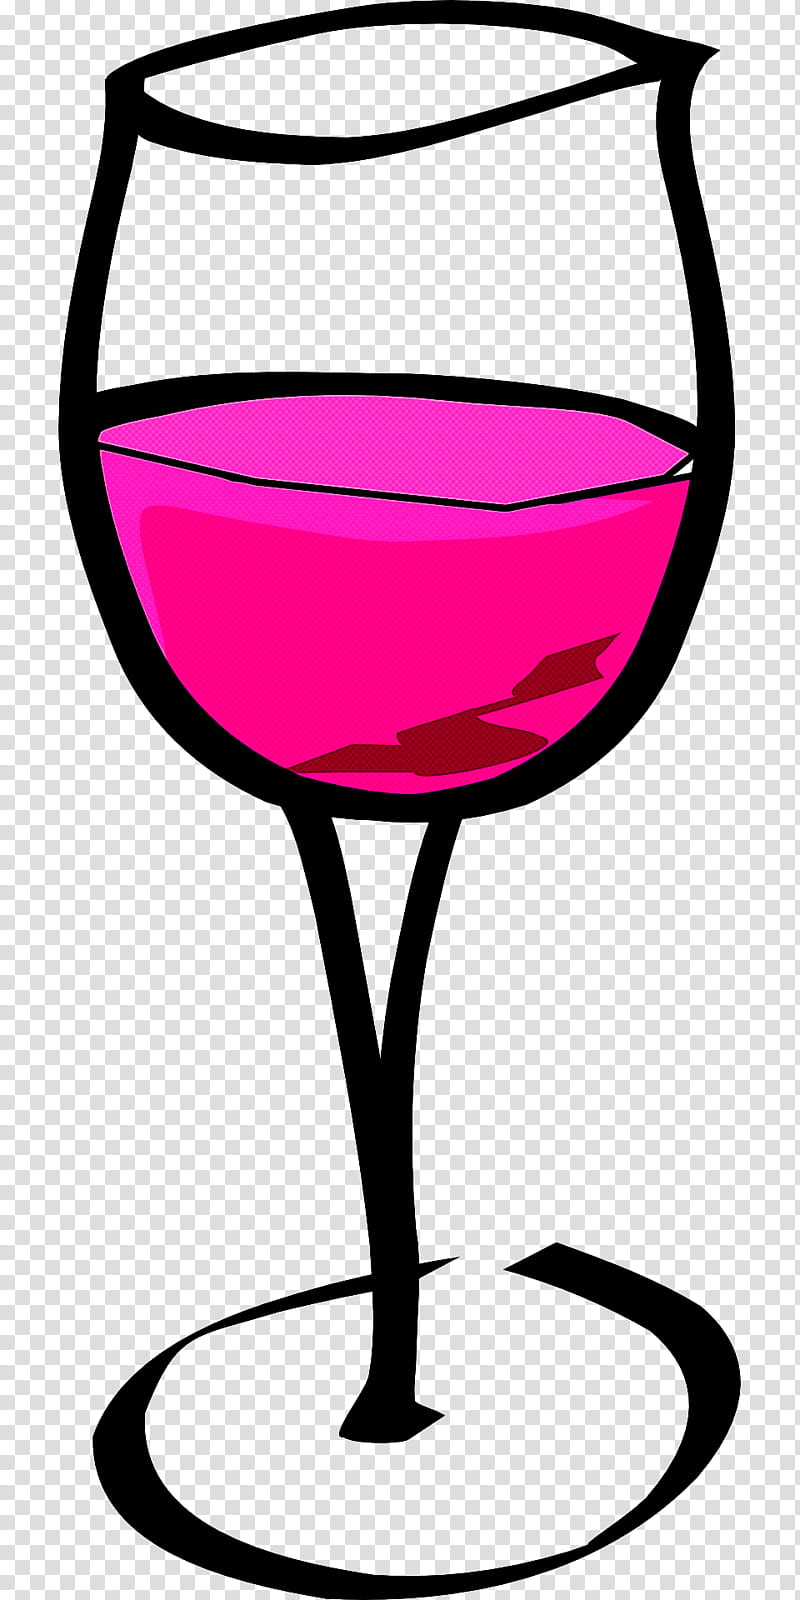 Wine glass, Stemware, Drinkware, Champagne Stemware, Tableware, Pink, Red Wine transparent background PNG clipart